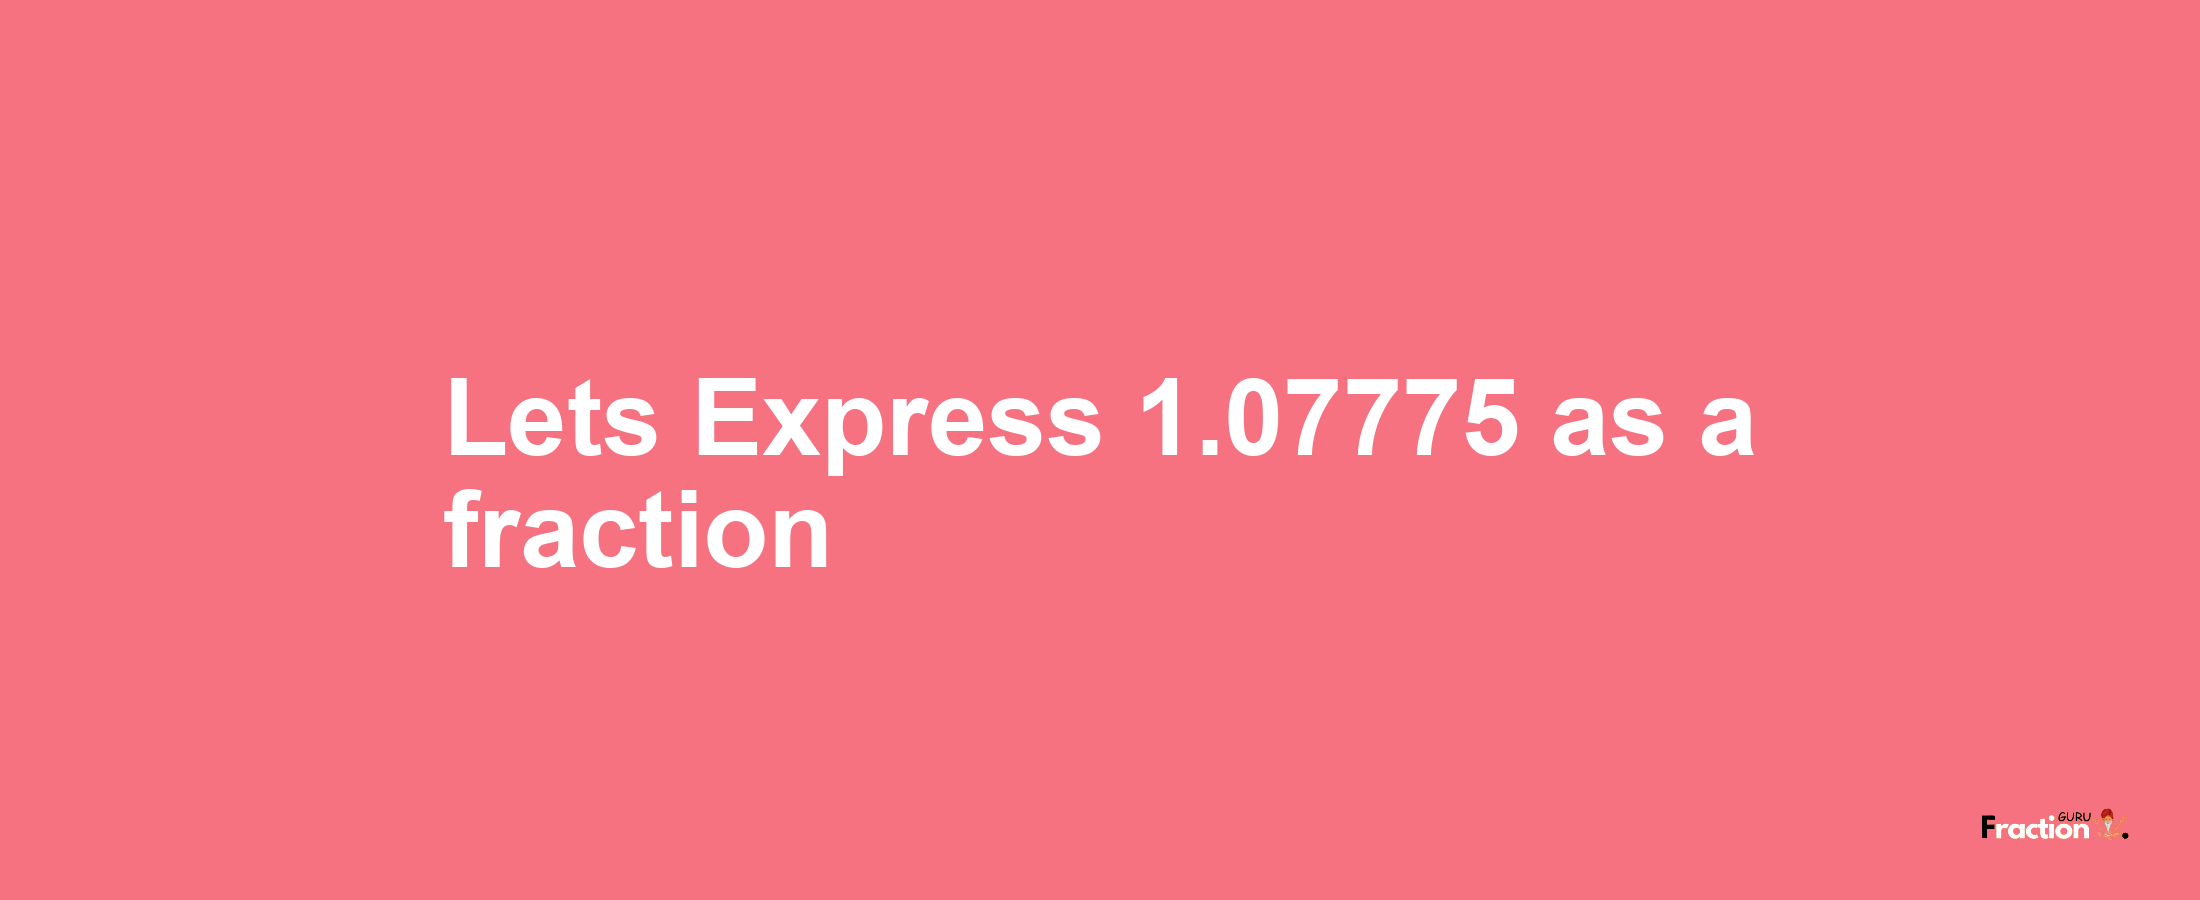 Lets Express 1.07775 as afraction